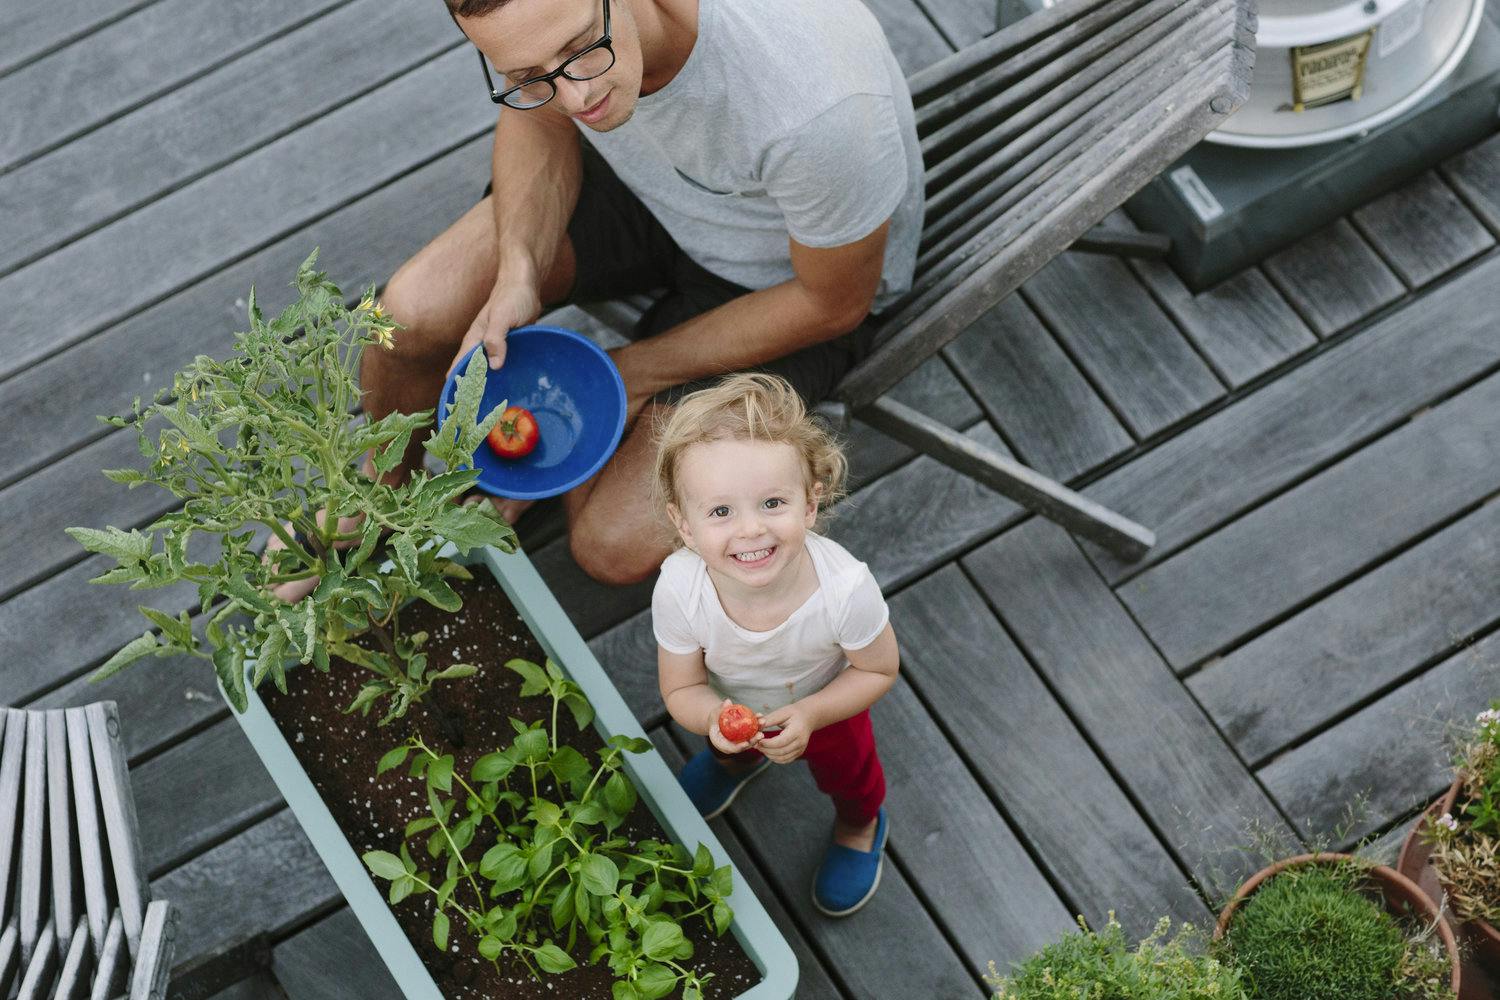 Idan and his daughter Ellie on their rooftop garden in the East Village.